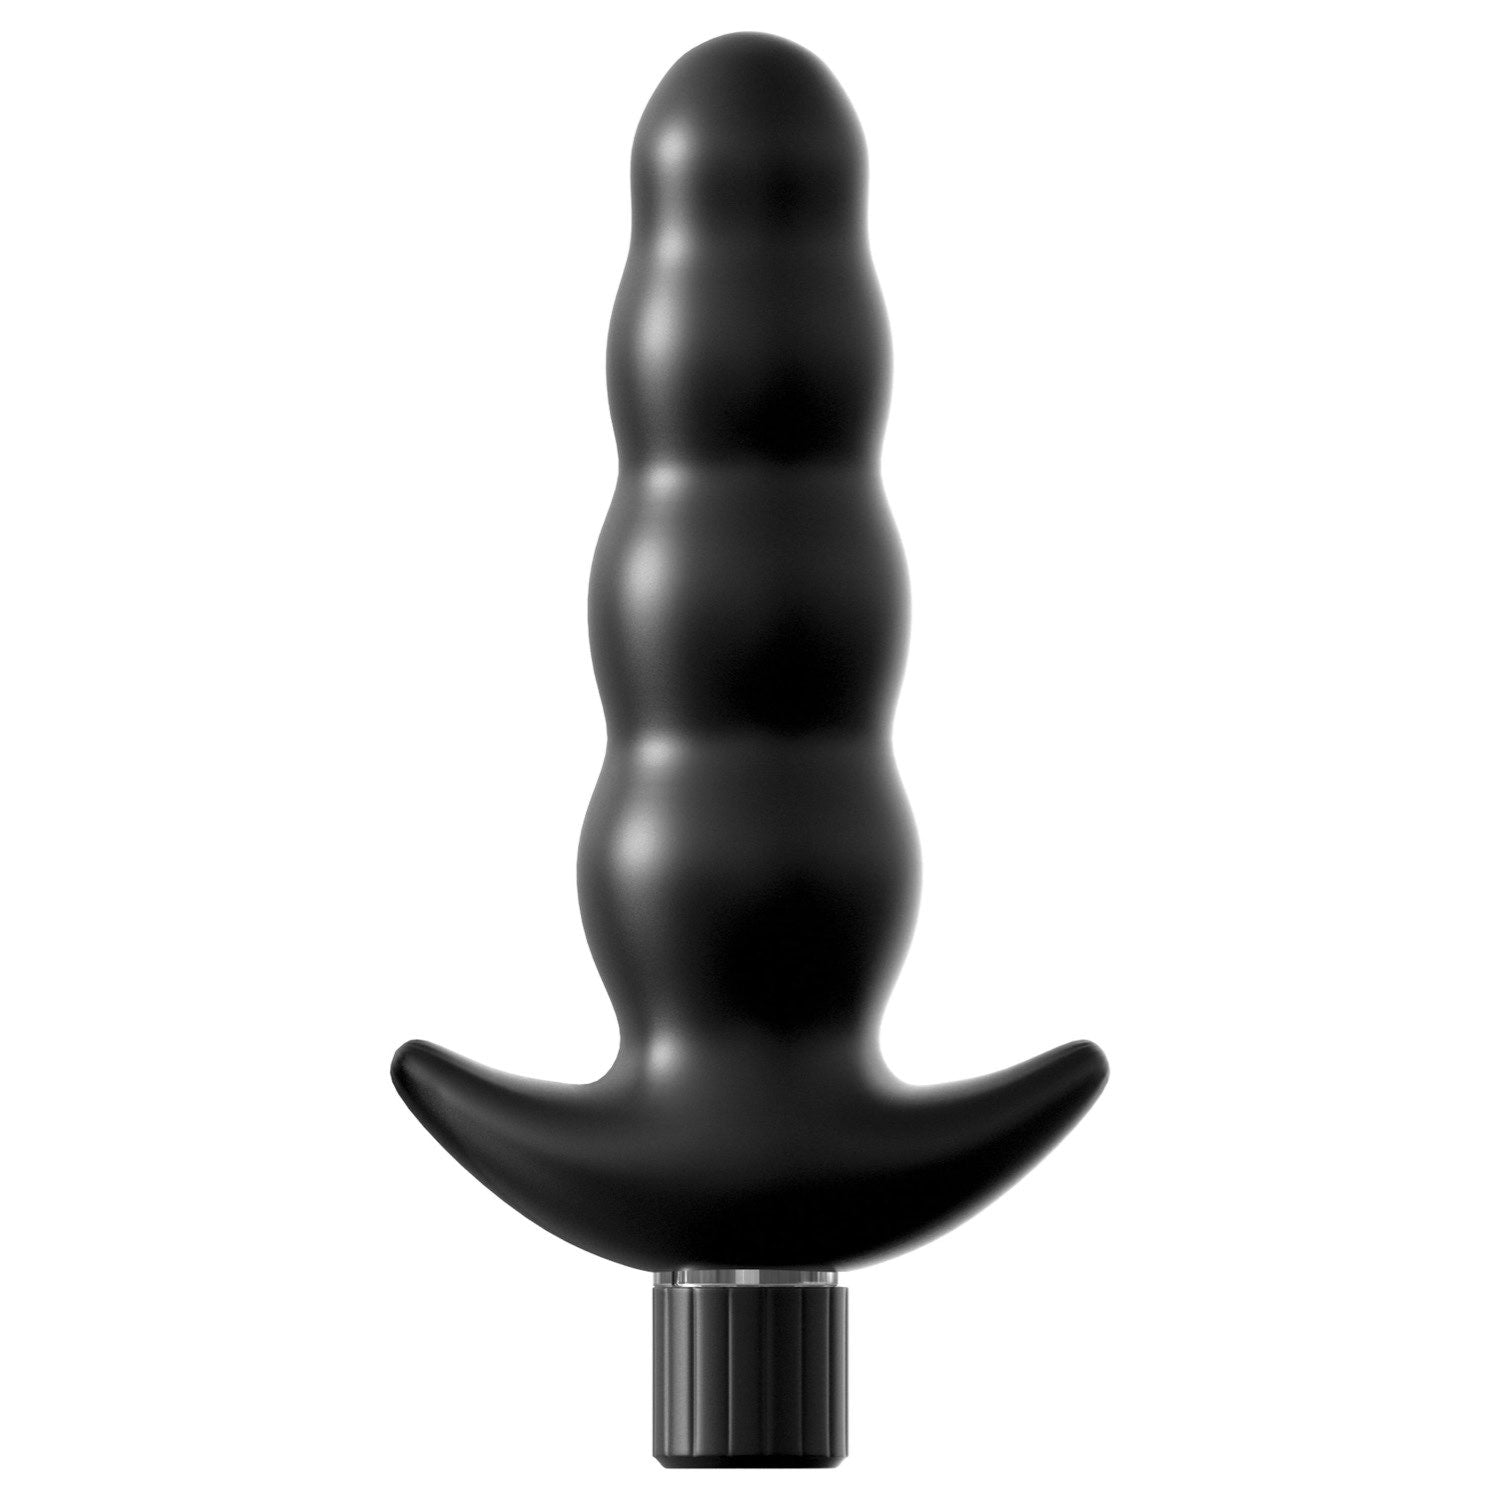 Anal Fantasy Collection Deluxe Fantasy Kit - Black Anal Kit - 7 Piece Set by Pipedream